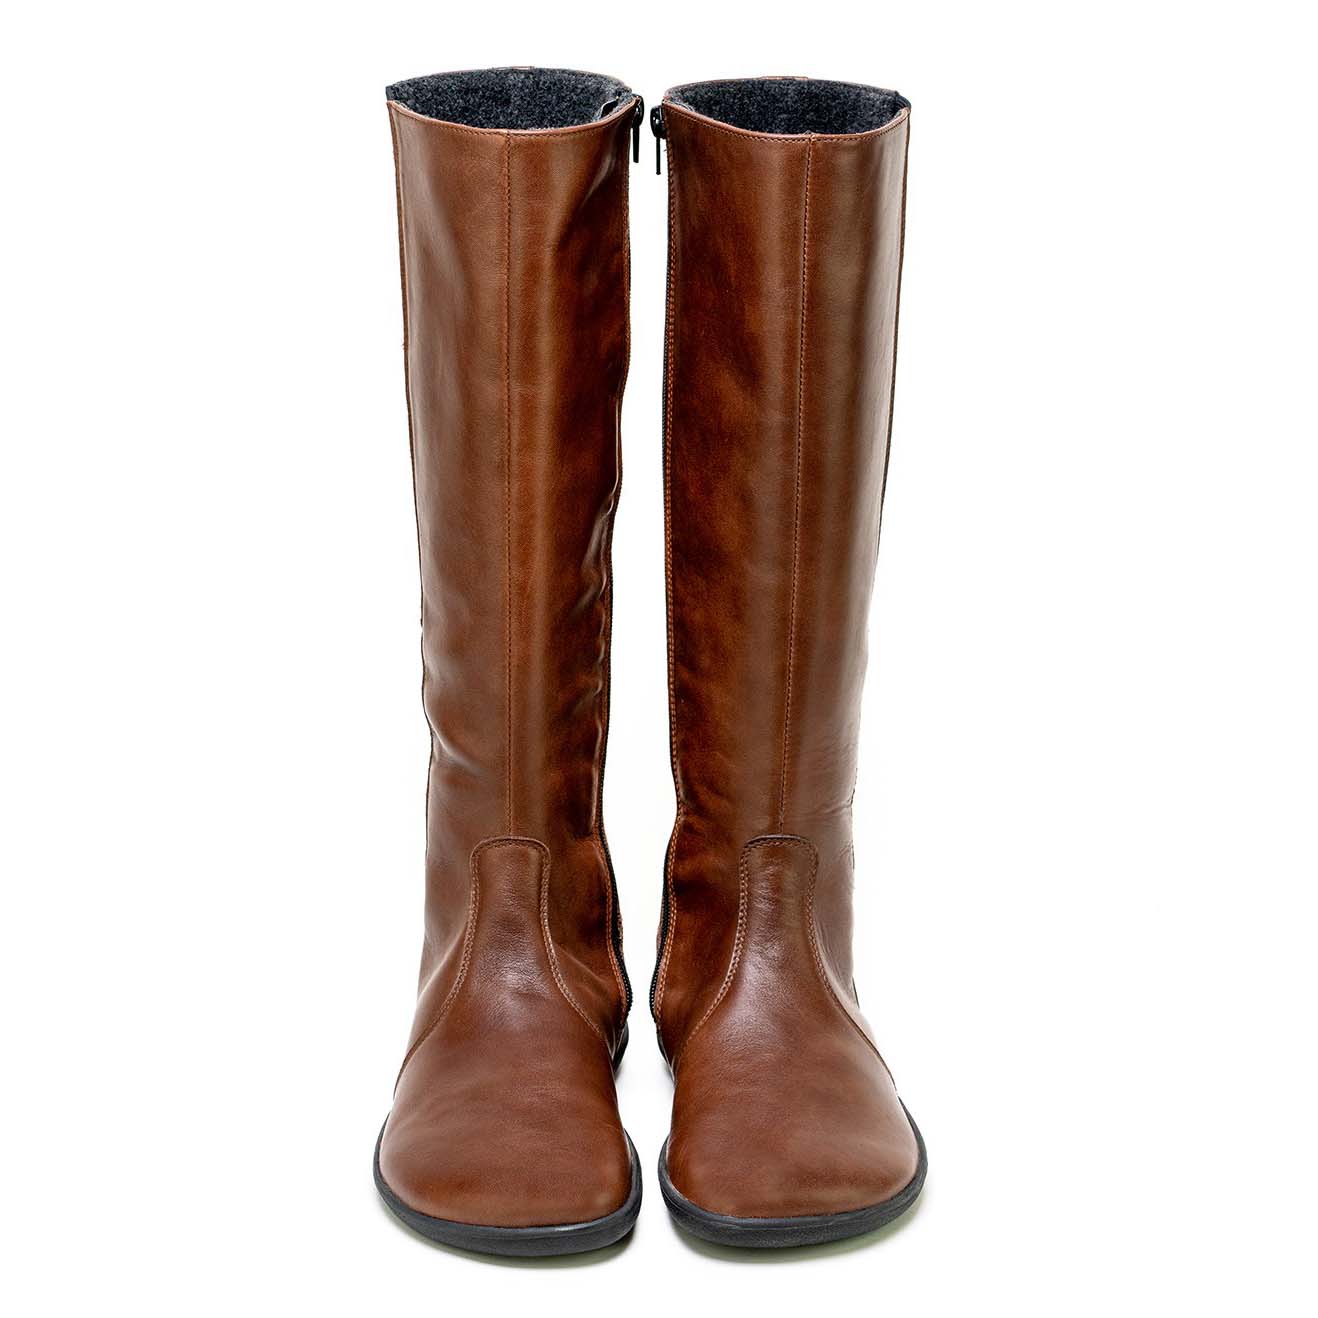 A photo of Belenka Sierra made from smooth leather, fleece, and rubber soles. The boots are brown in color with a tall riding boot elastic paneled shaft lined with fleece. Both boots are shown beside each other from the front against a white background. #color_dark-brown